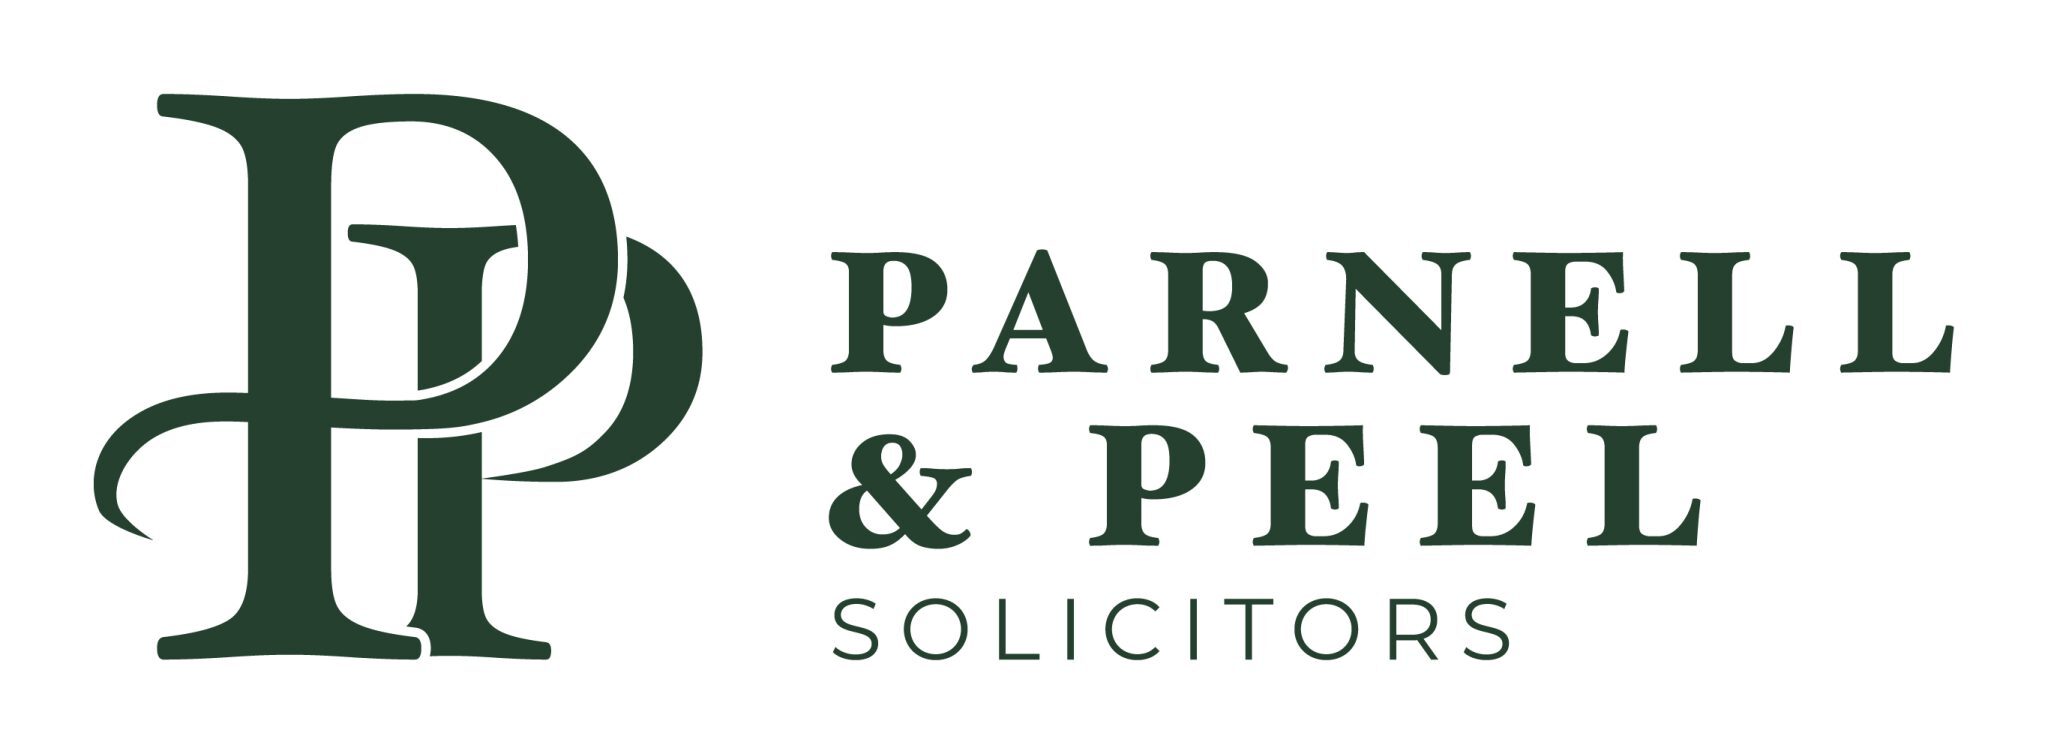 Parnell and Peel Solicitors